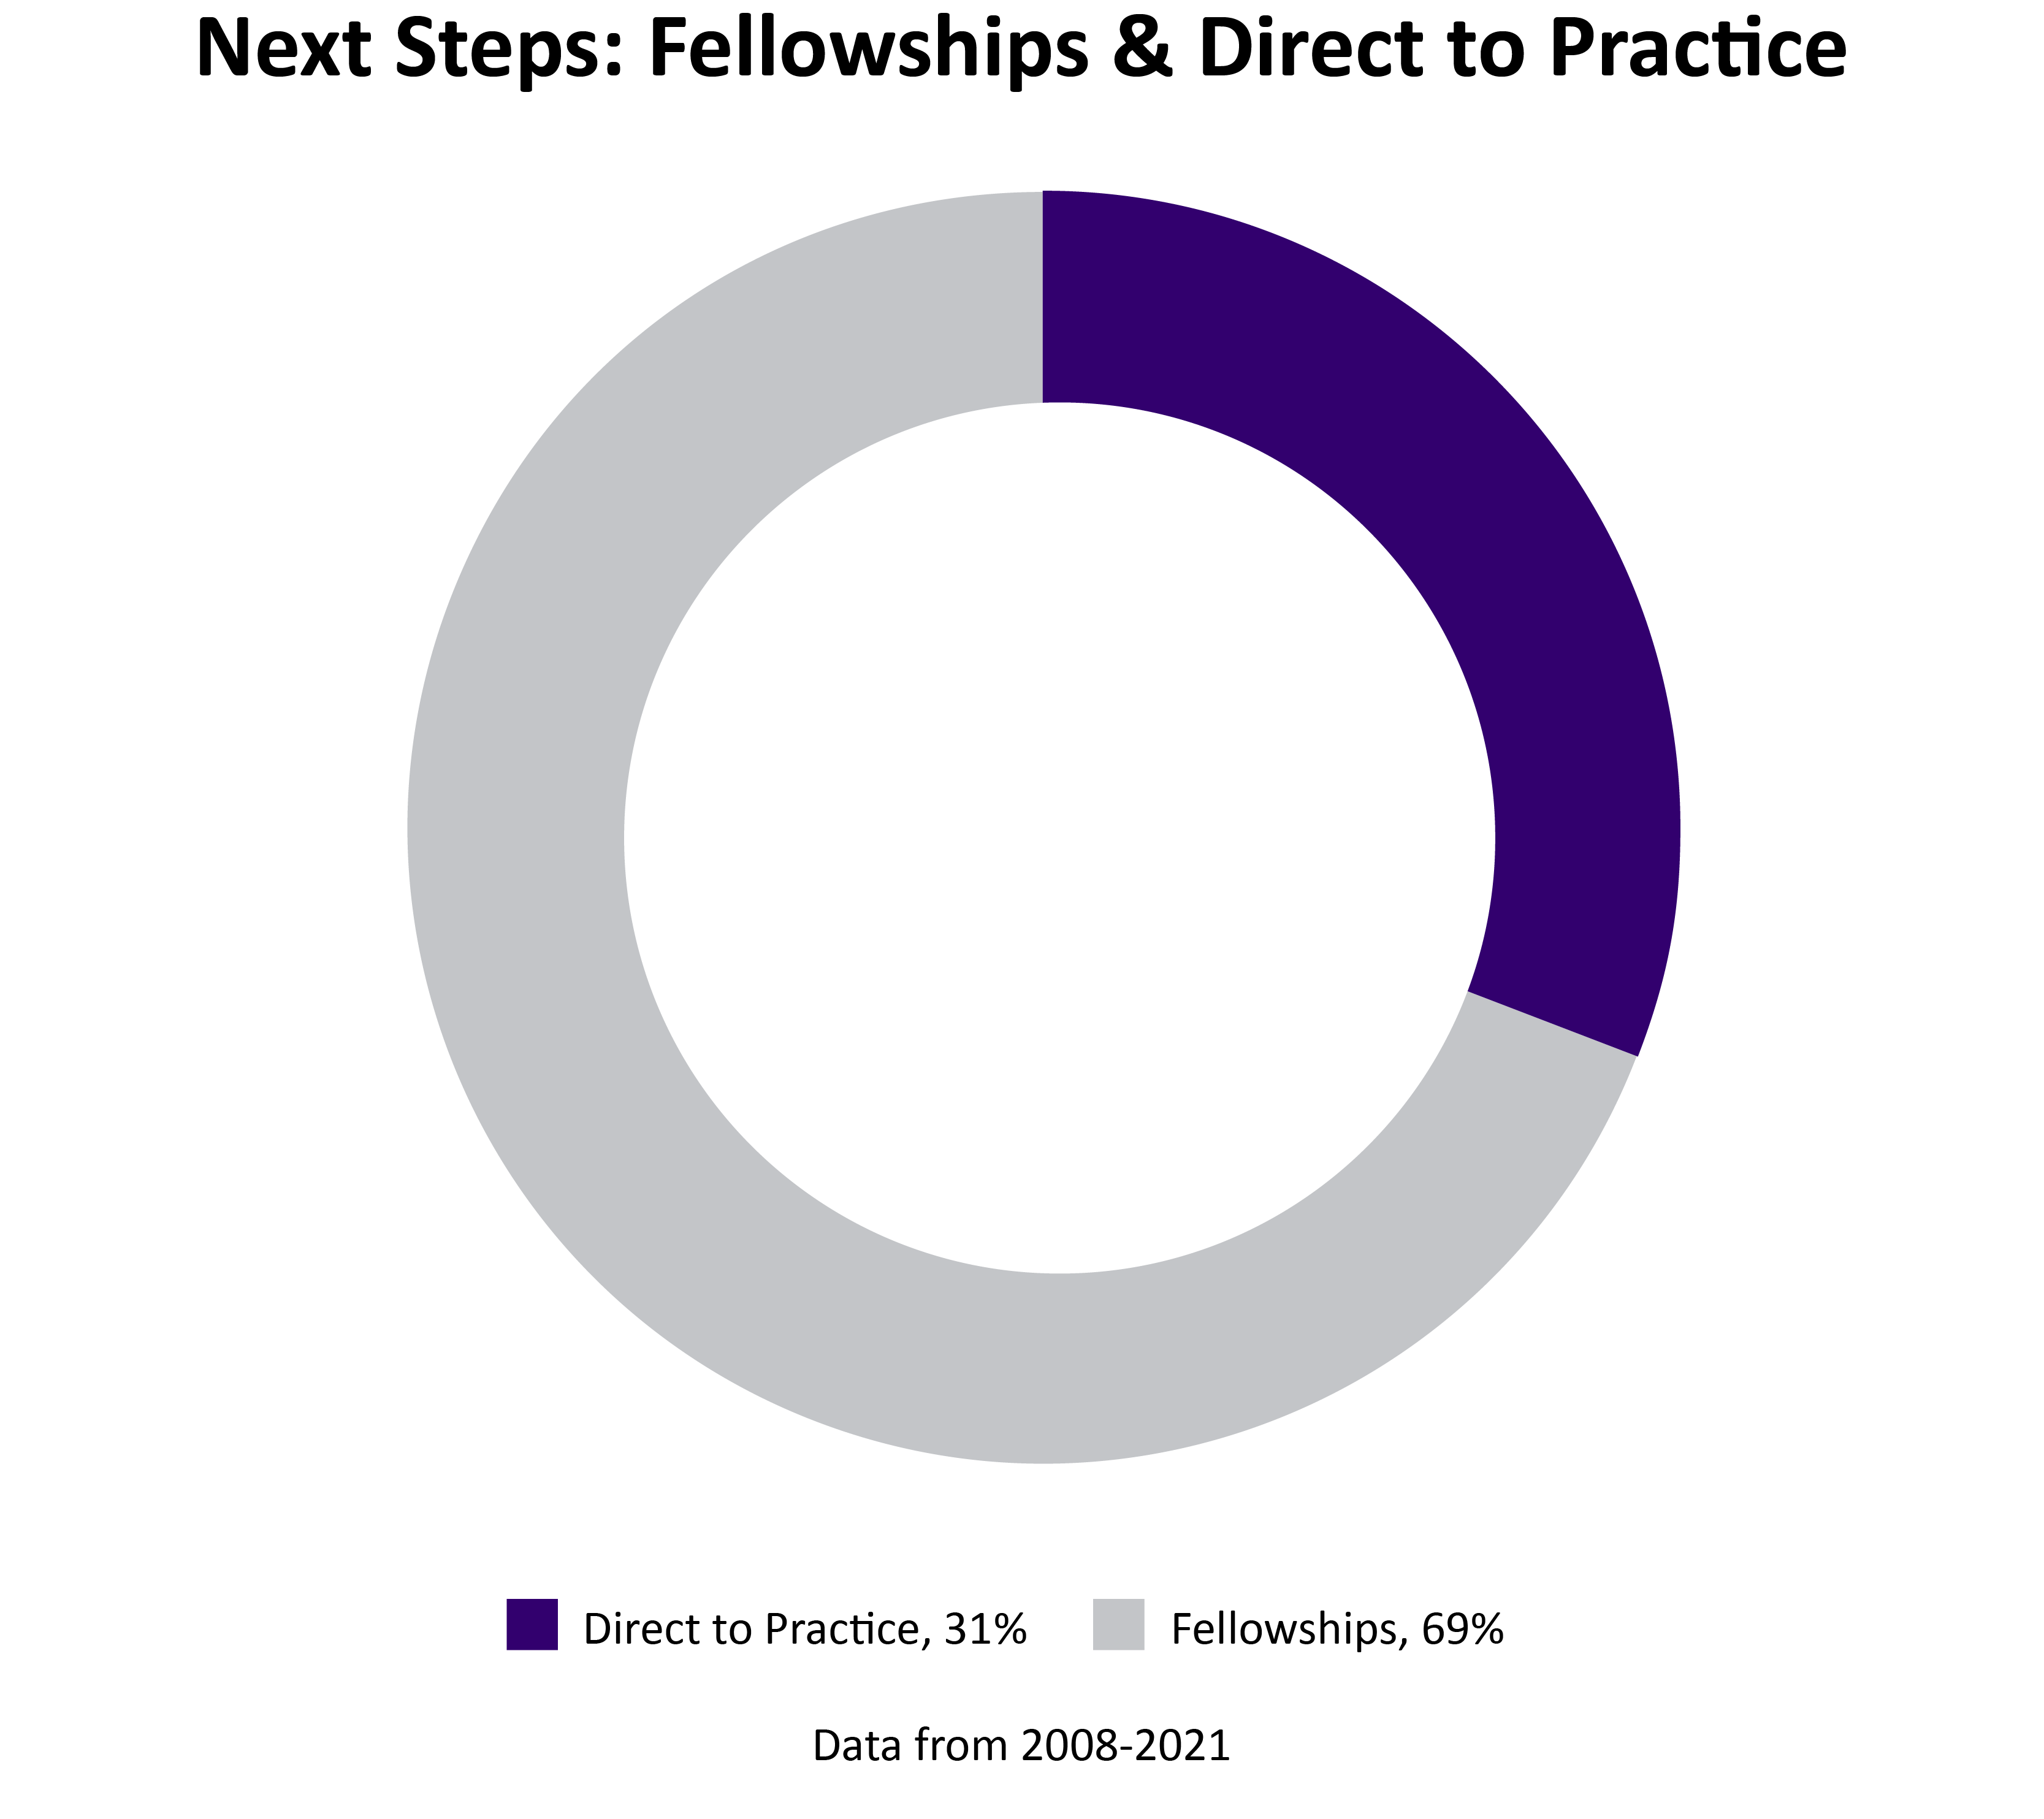 Doughnut graph showing that 31% of alumni go to direct to practice, and 69% move on to a fellowship, based on data from 2008-2021.